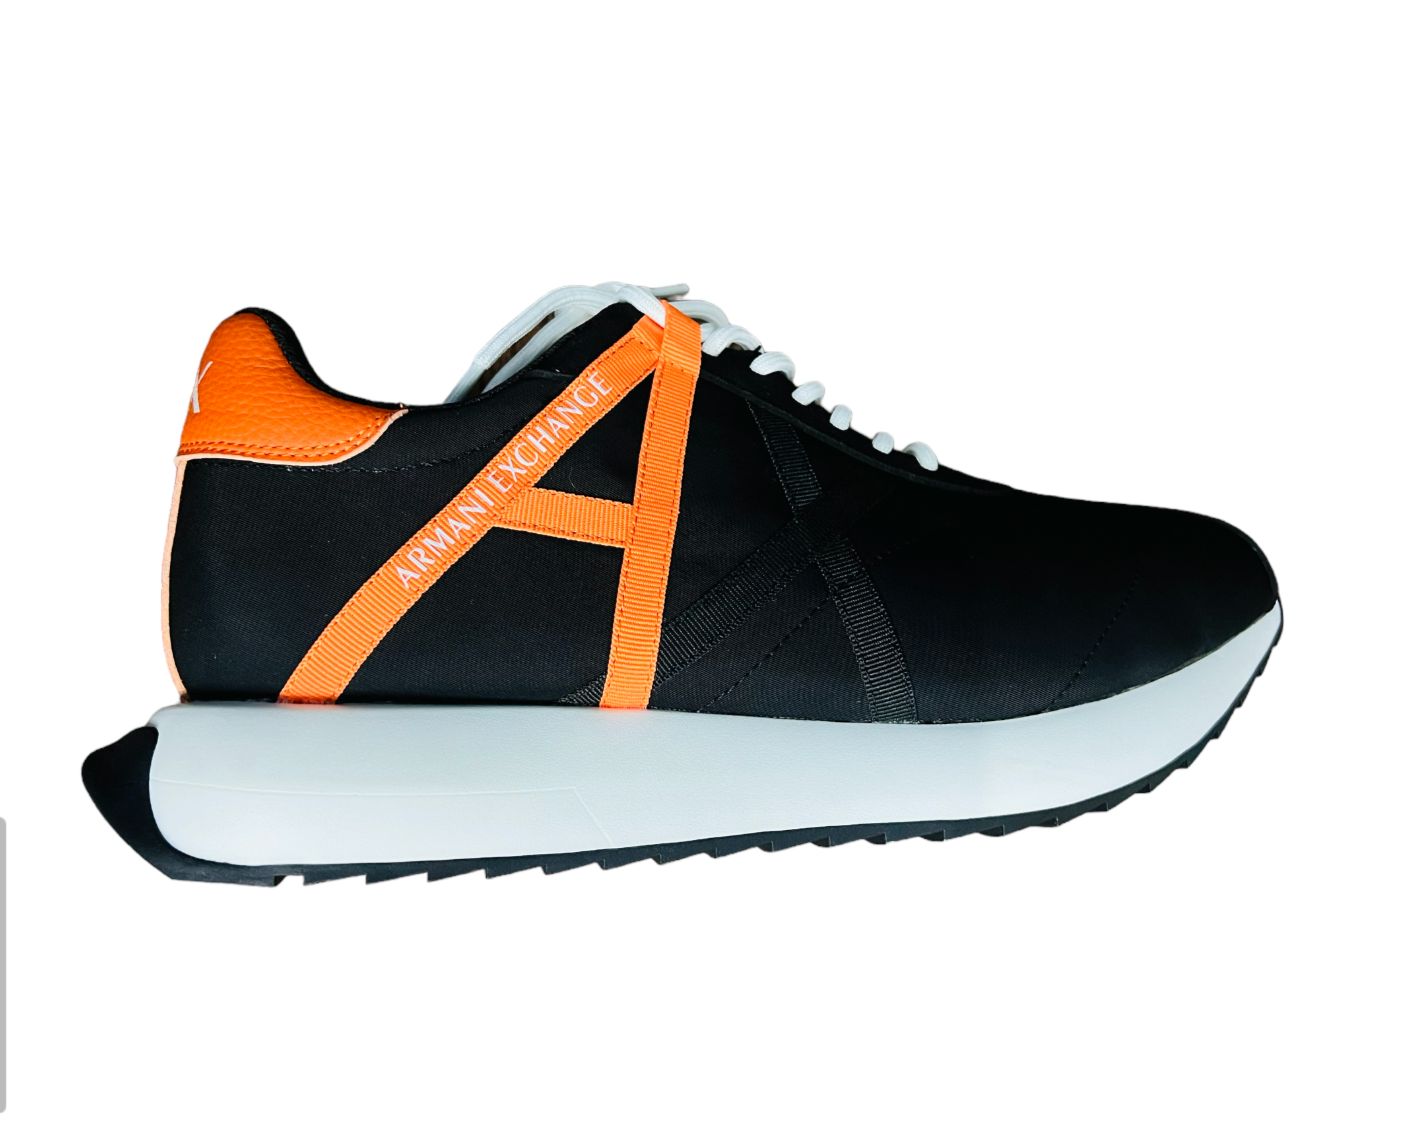 ARMANI EXCHANGE Sneakers in technical fabric, mesh and suede